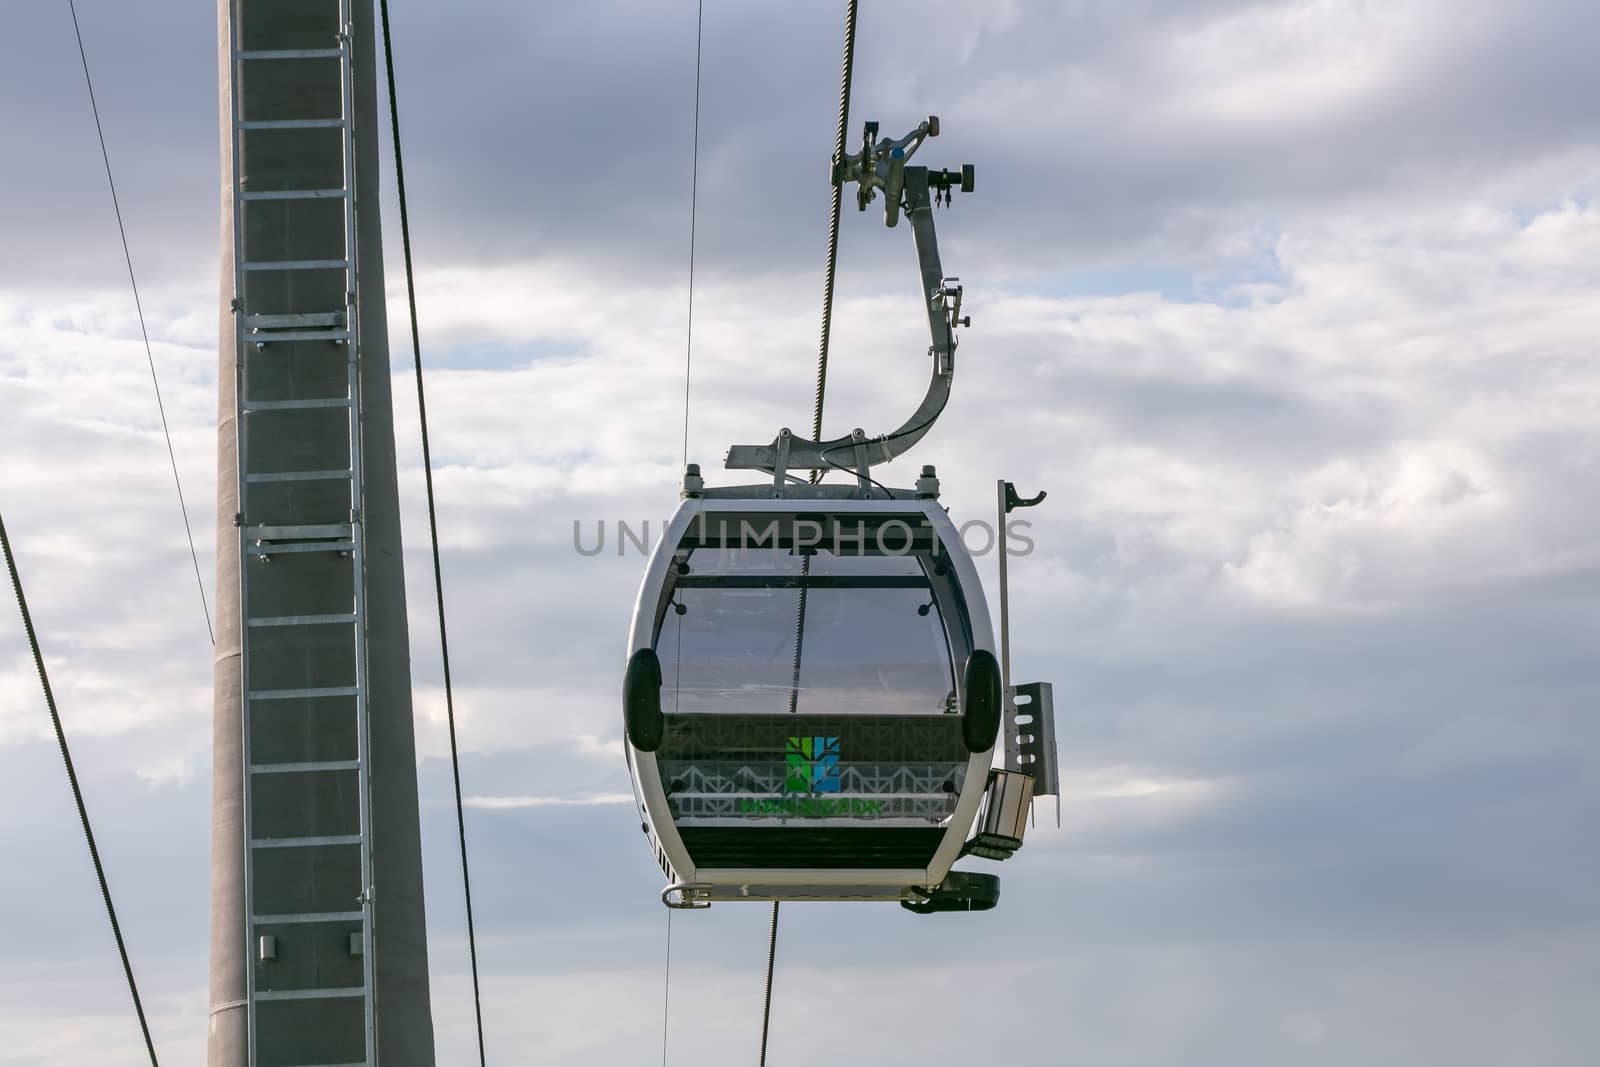 Manzherok resort, Altai Mountains, Russia - August 12, 2020: Low angle shot of cableway on a cloudy sky background